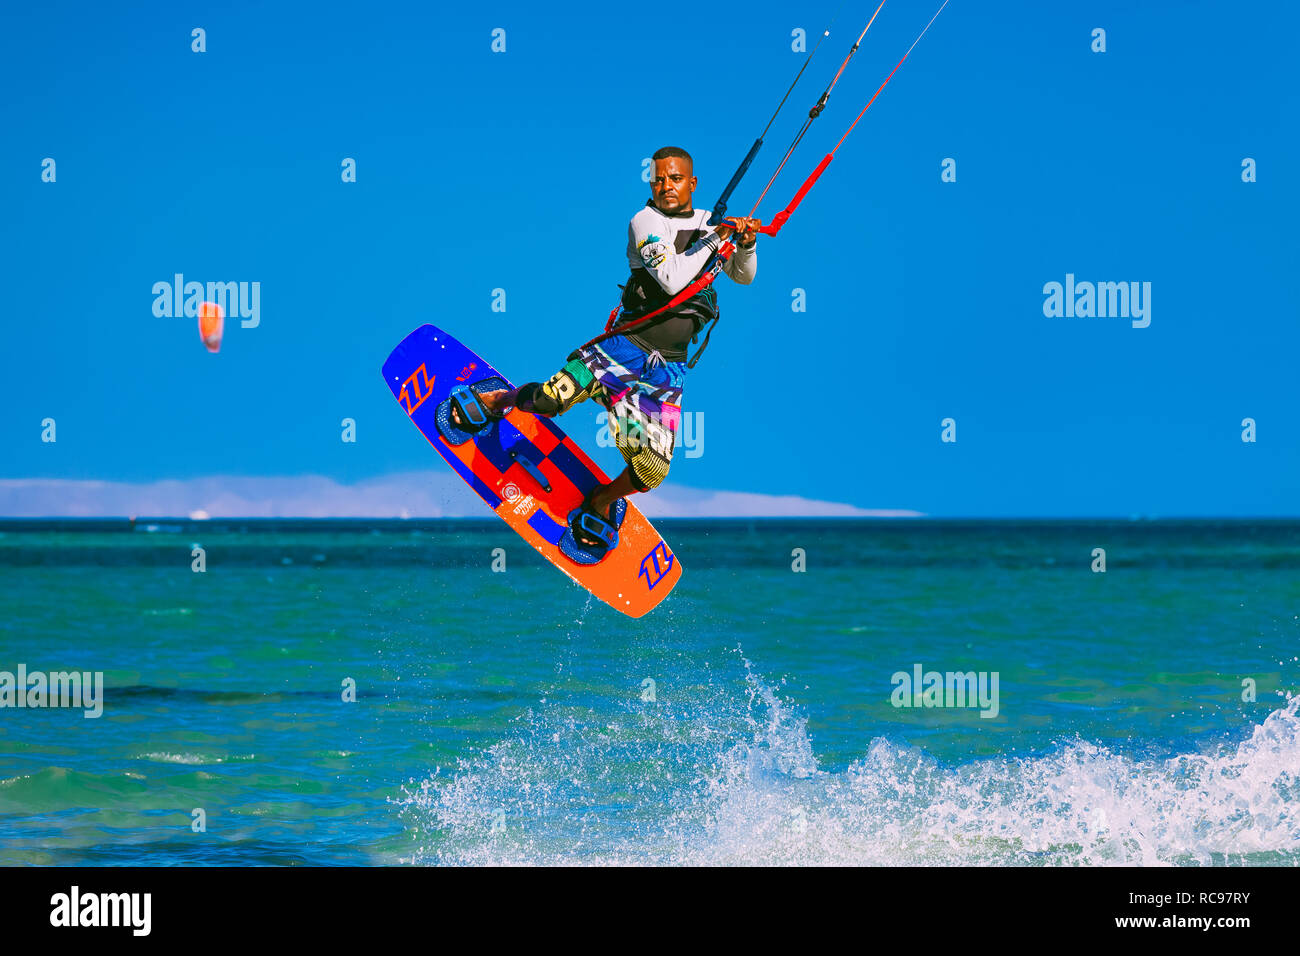 Egypt, Hurghada - 30 November, 2017: The kitesurfer soaring in the blue sky over the Red sea surface. Amazing wave splash. The extreme water sport activity. Popular tourist attraction. Stock Photo